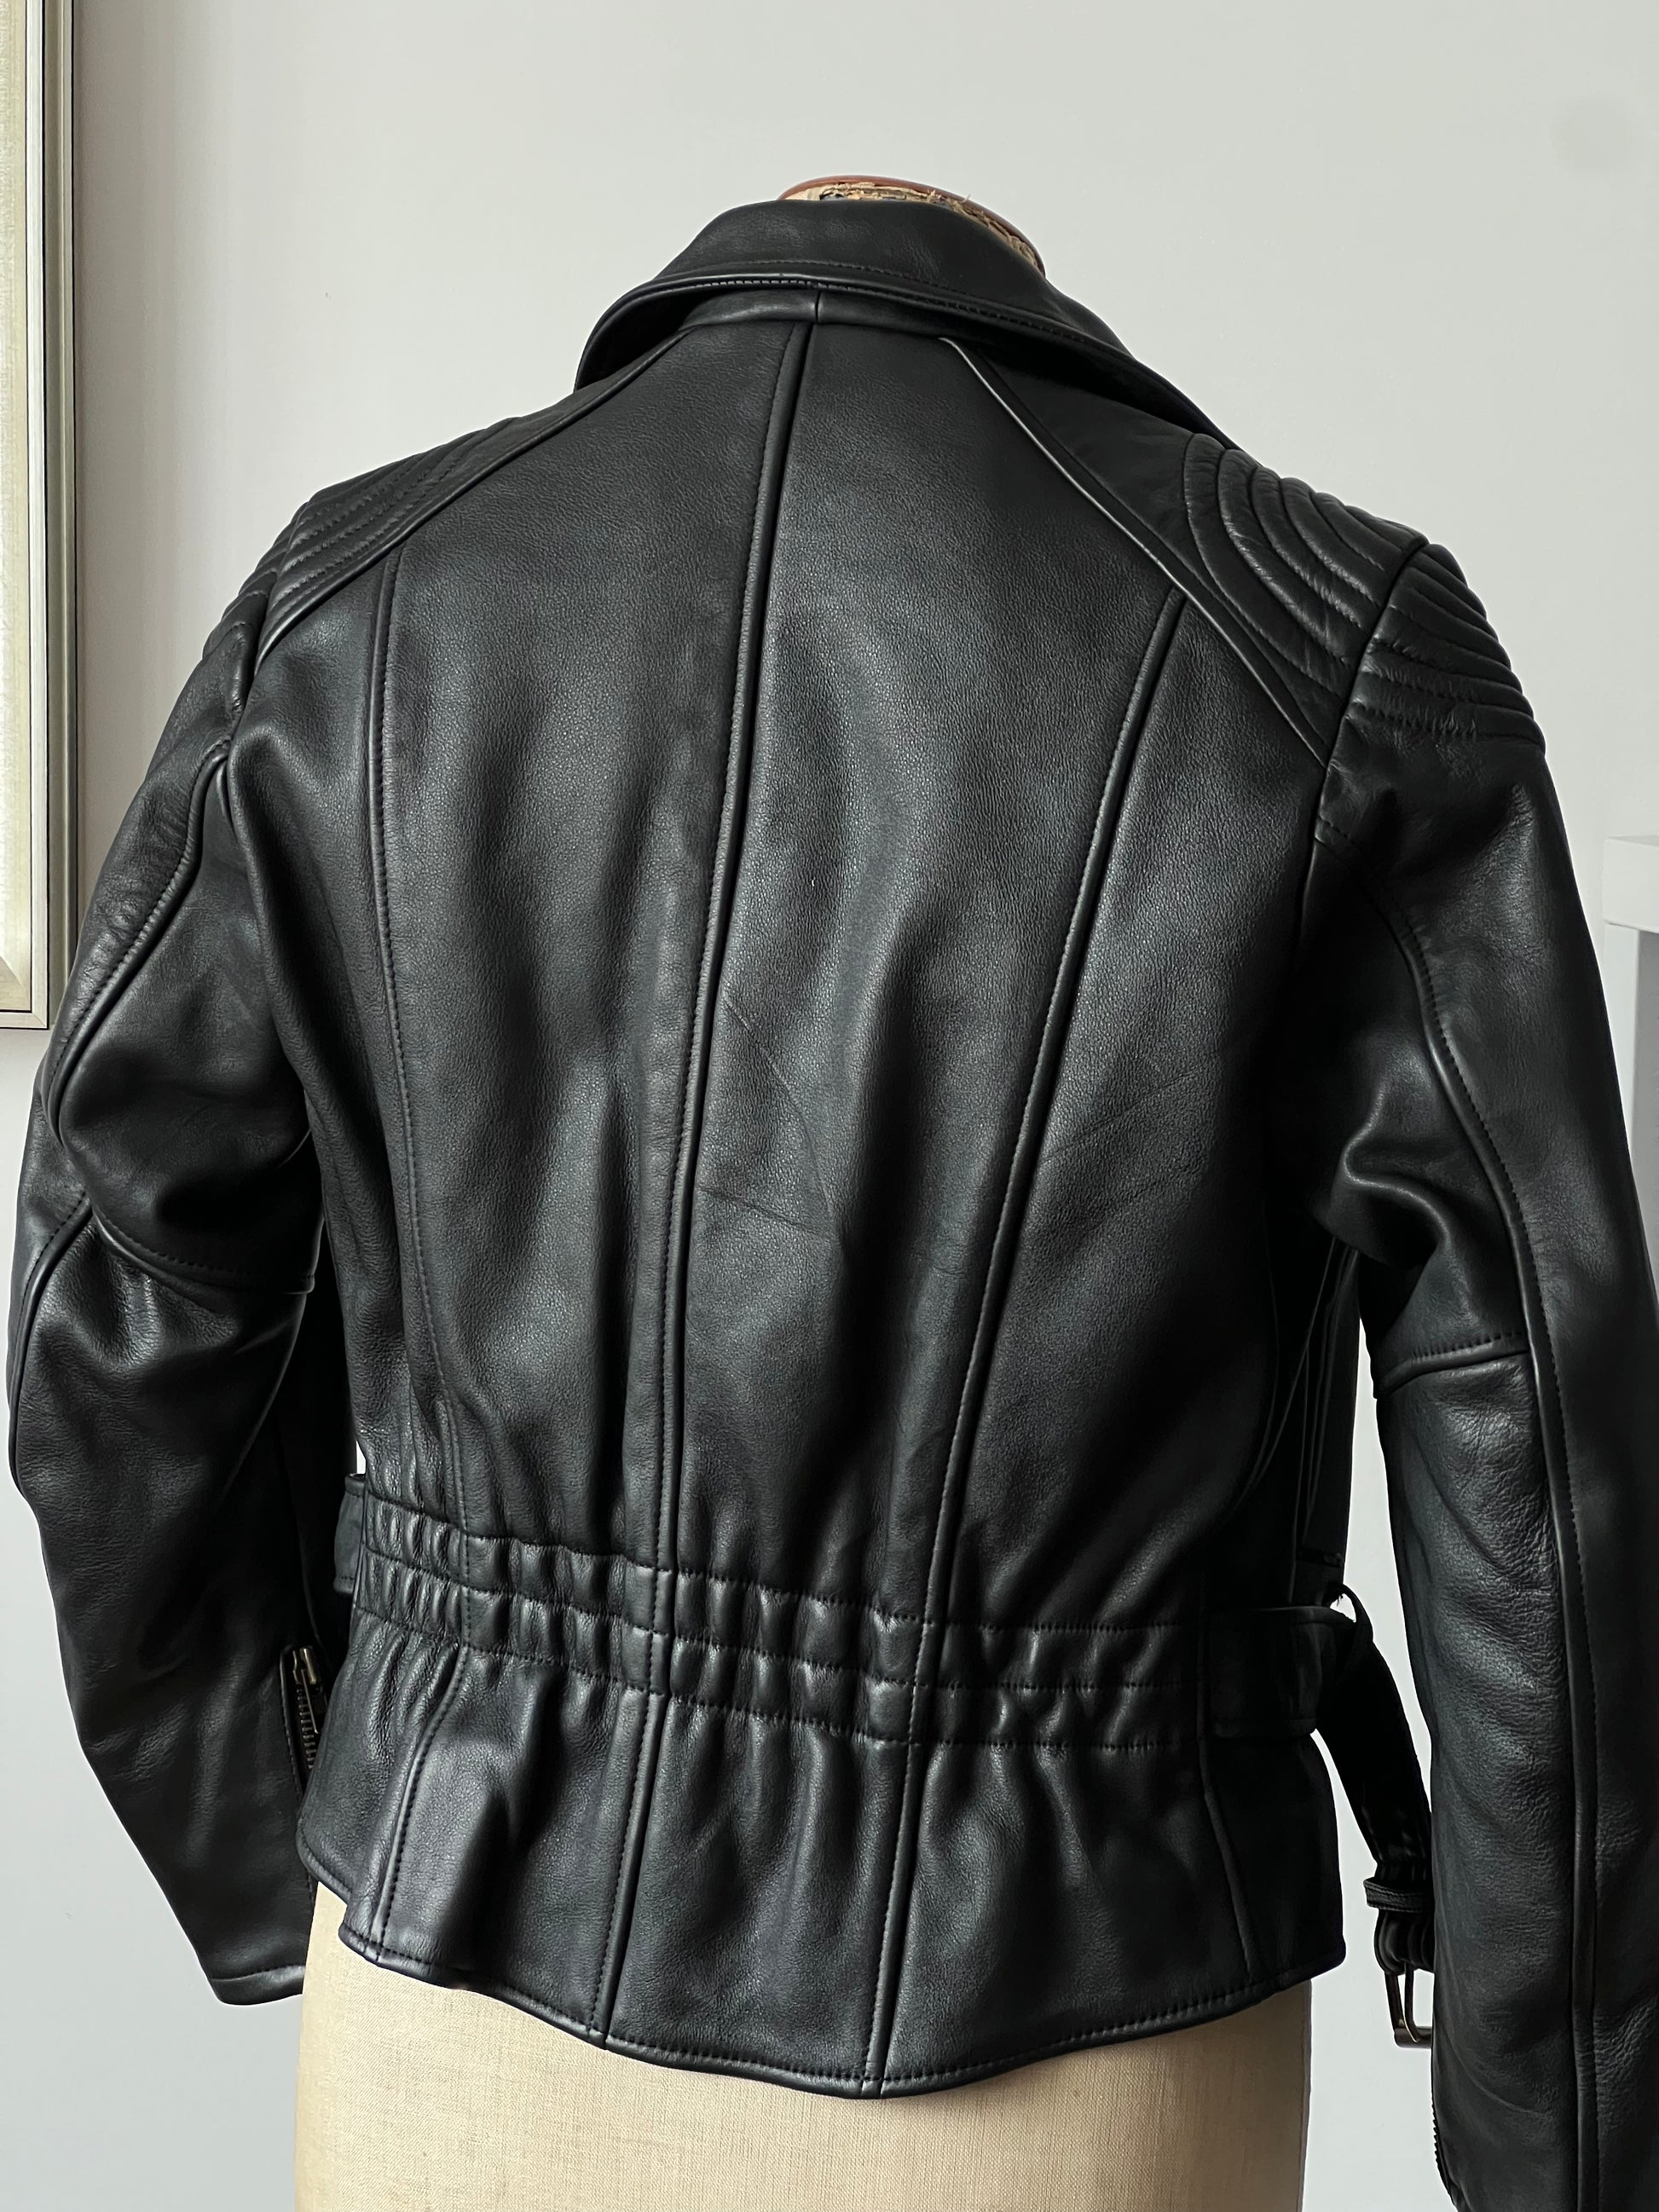 black woman’s leather jacket back on a mannequin